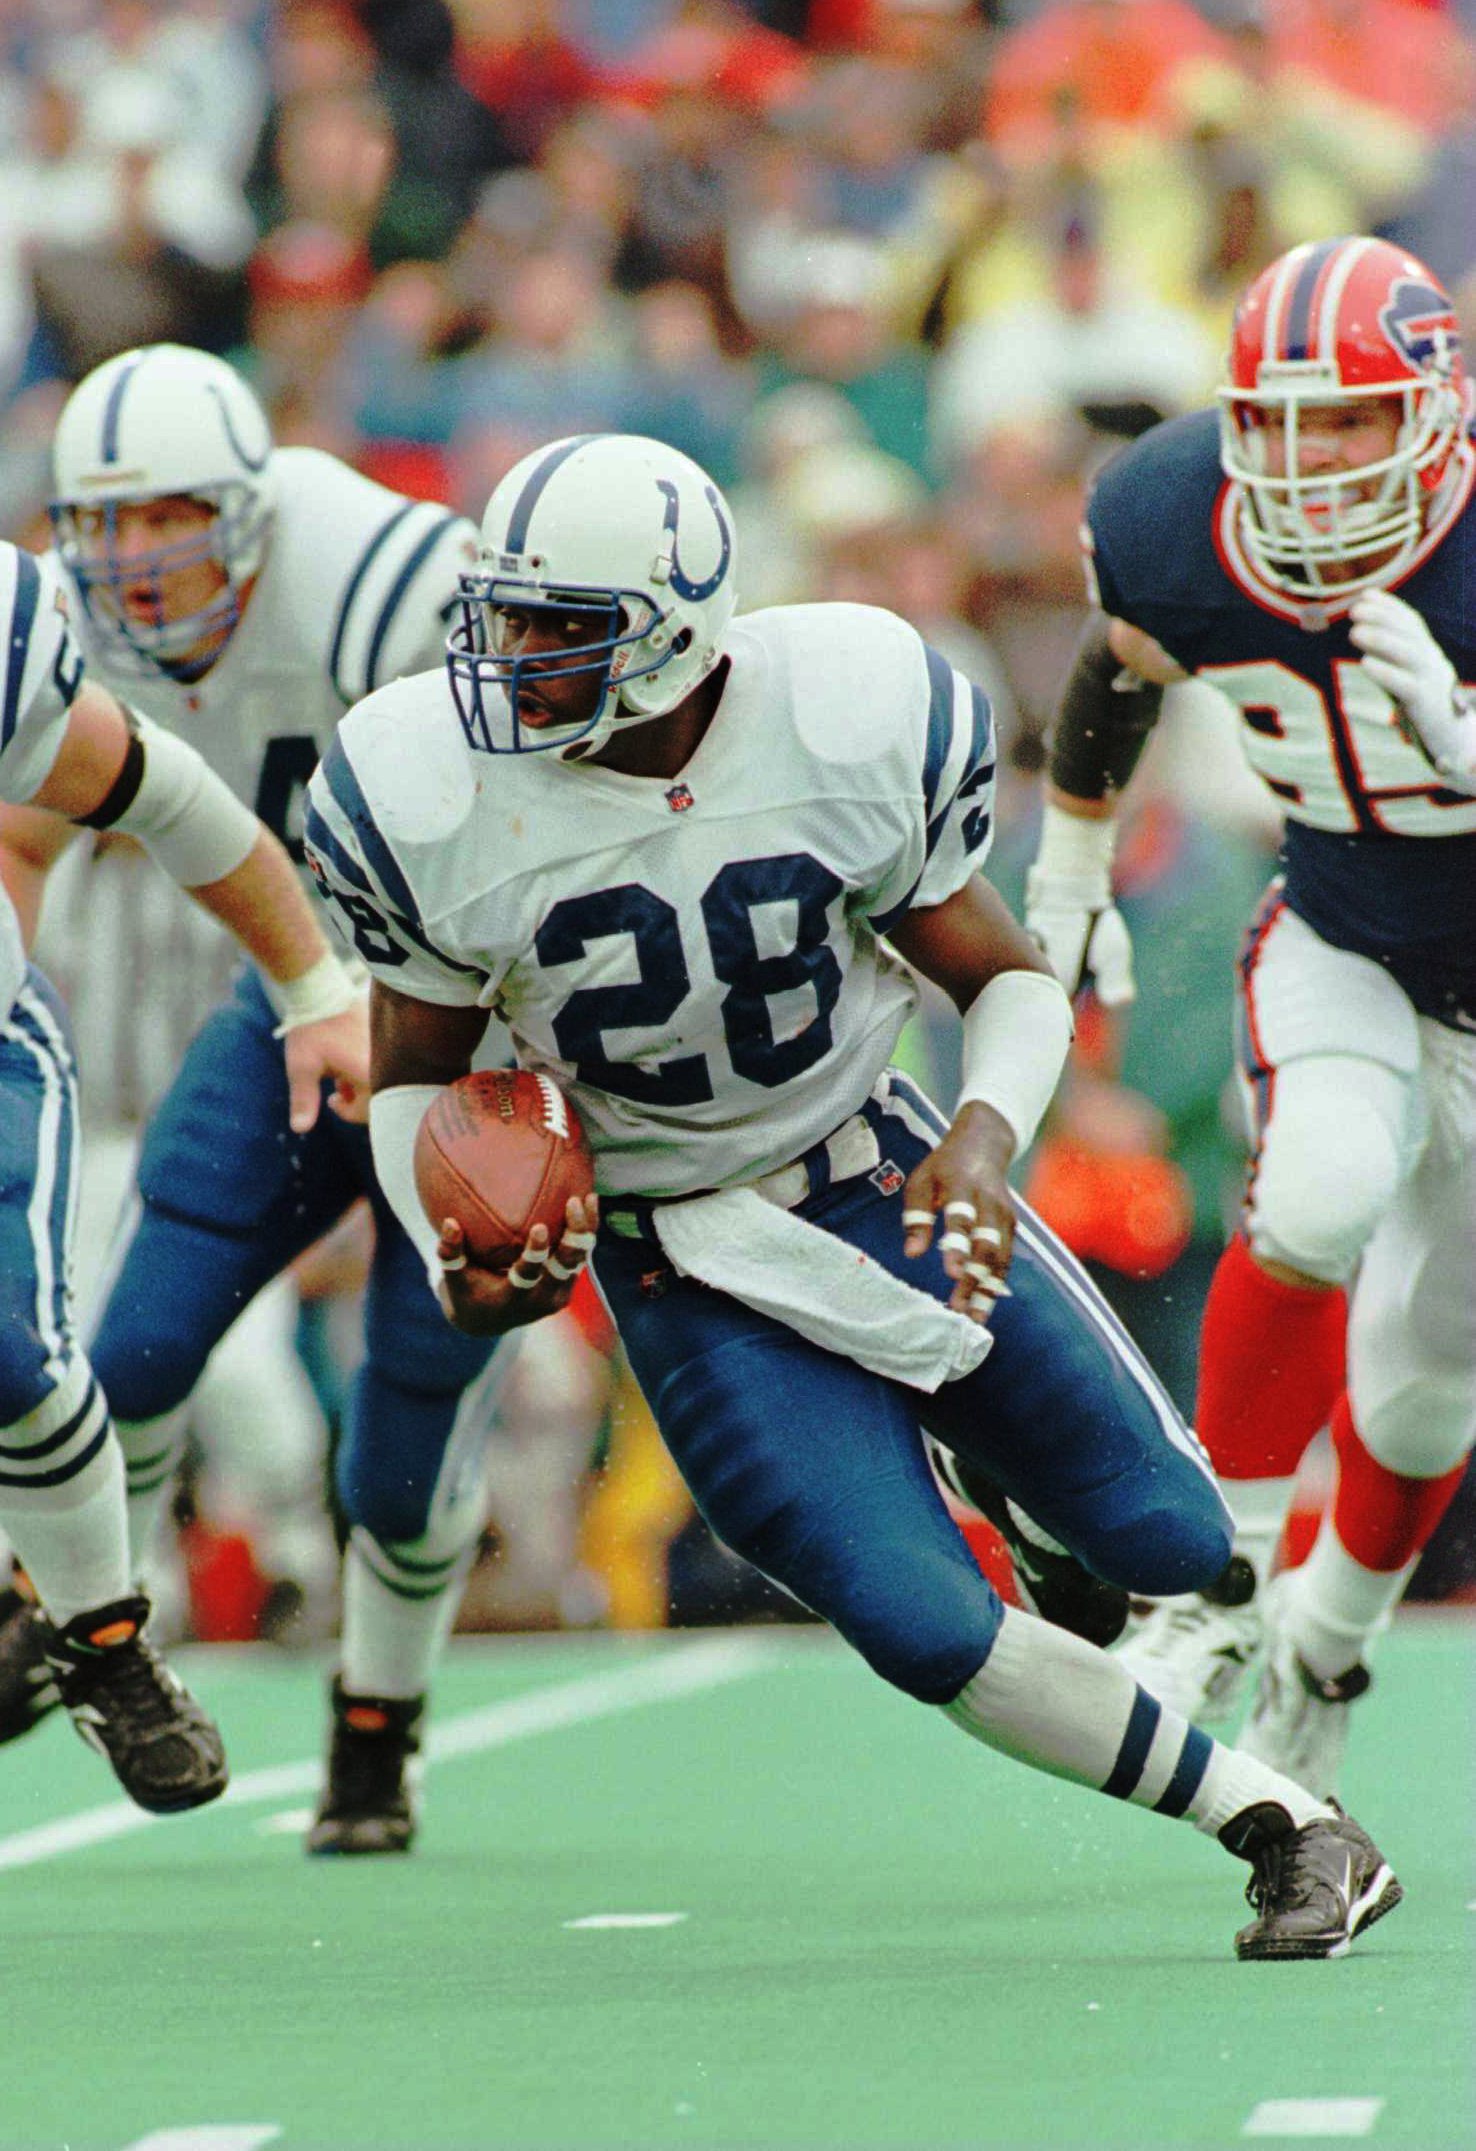 17 SEP 1995:  RUNNING BACK MARSHALL FAULK OF THE INDIANAPOLIS COLTS POWERS HIS WAY TO IN ACTION AGAINST THE BUFFALO BILLS AT RICH STADIUM, ORCHARD PARK, NEW YORK.  FAULK HAD TWO FIRST-HALF TOUCHDOWNS.  Mandatory Credit: Rick Stewart/ALLSPORT